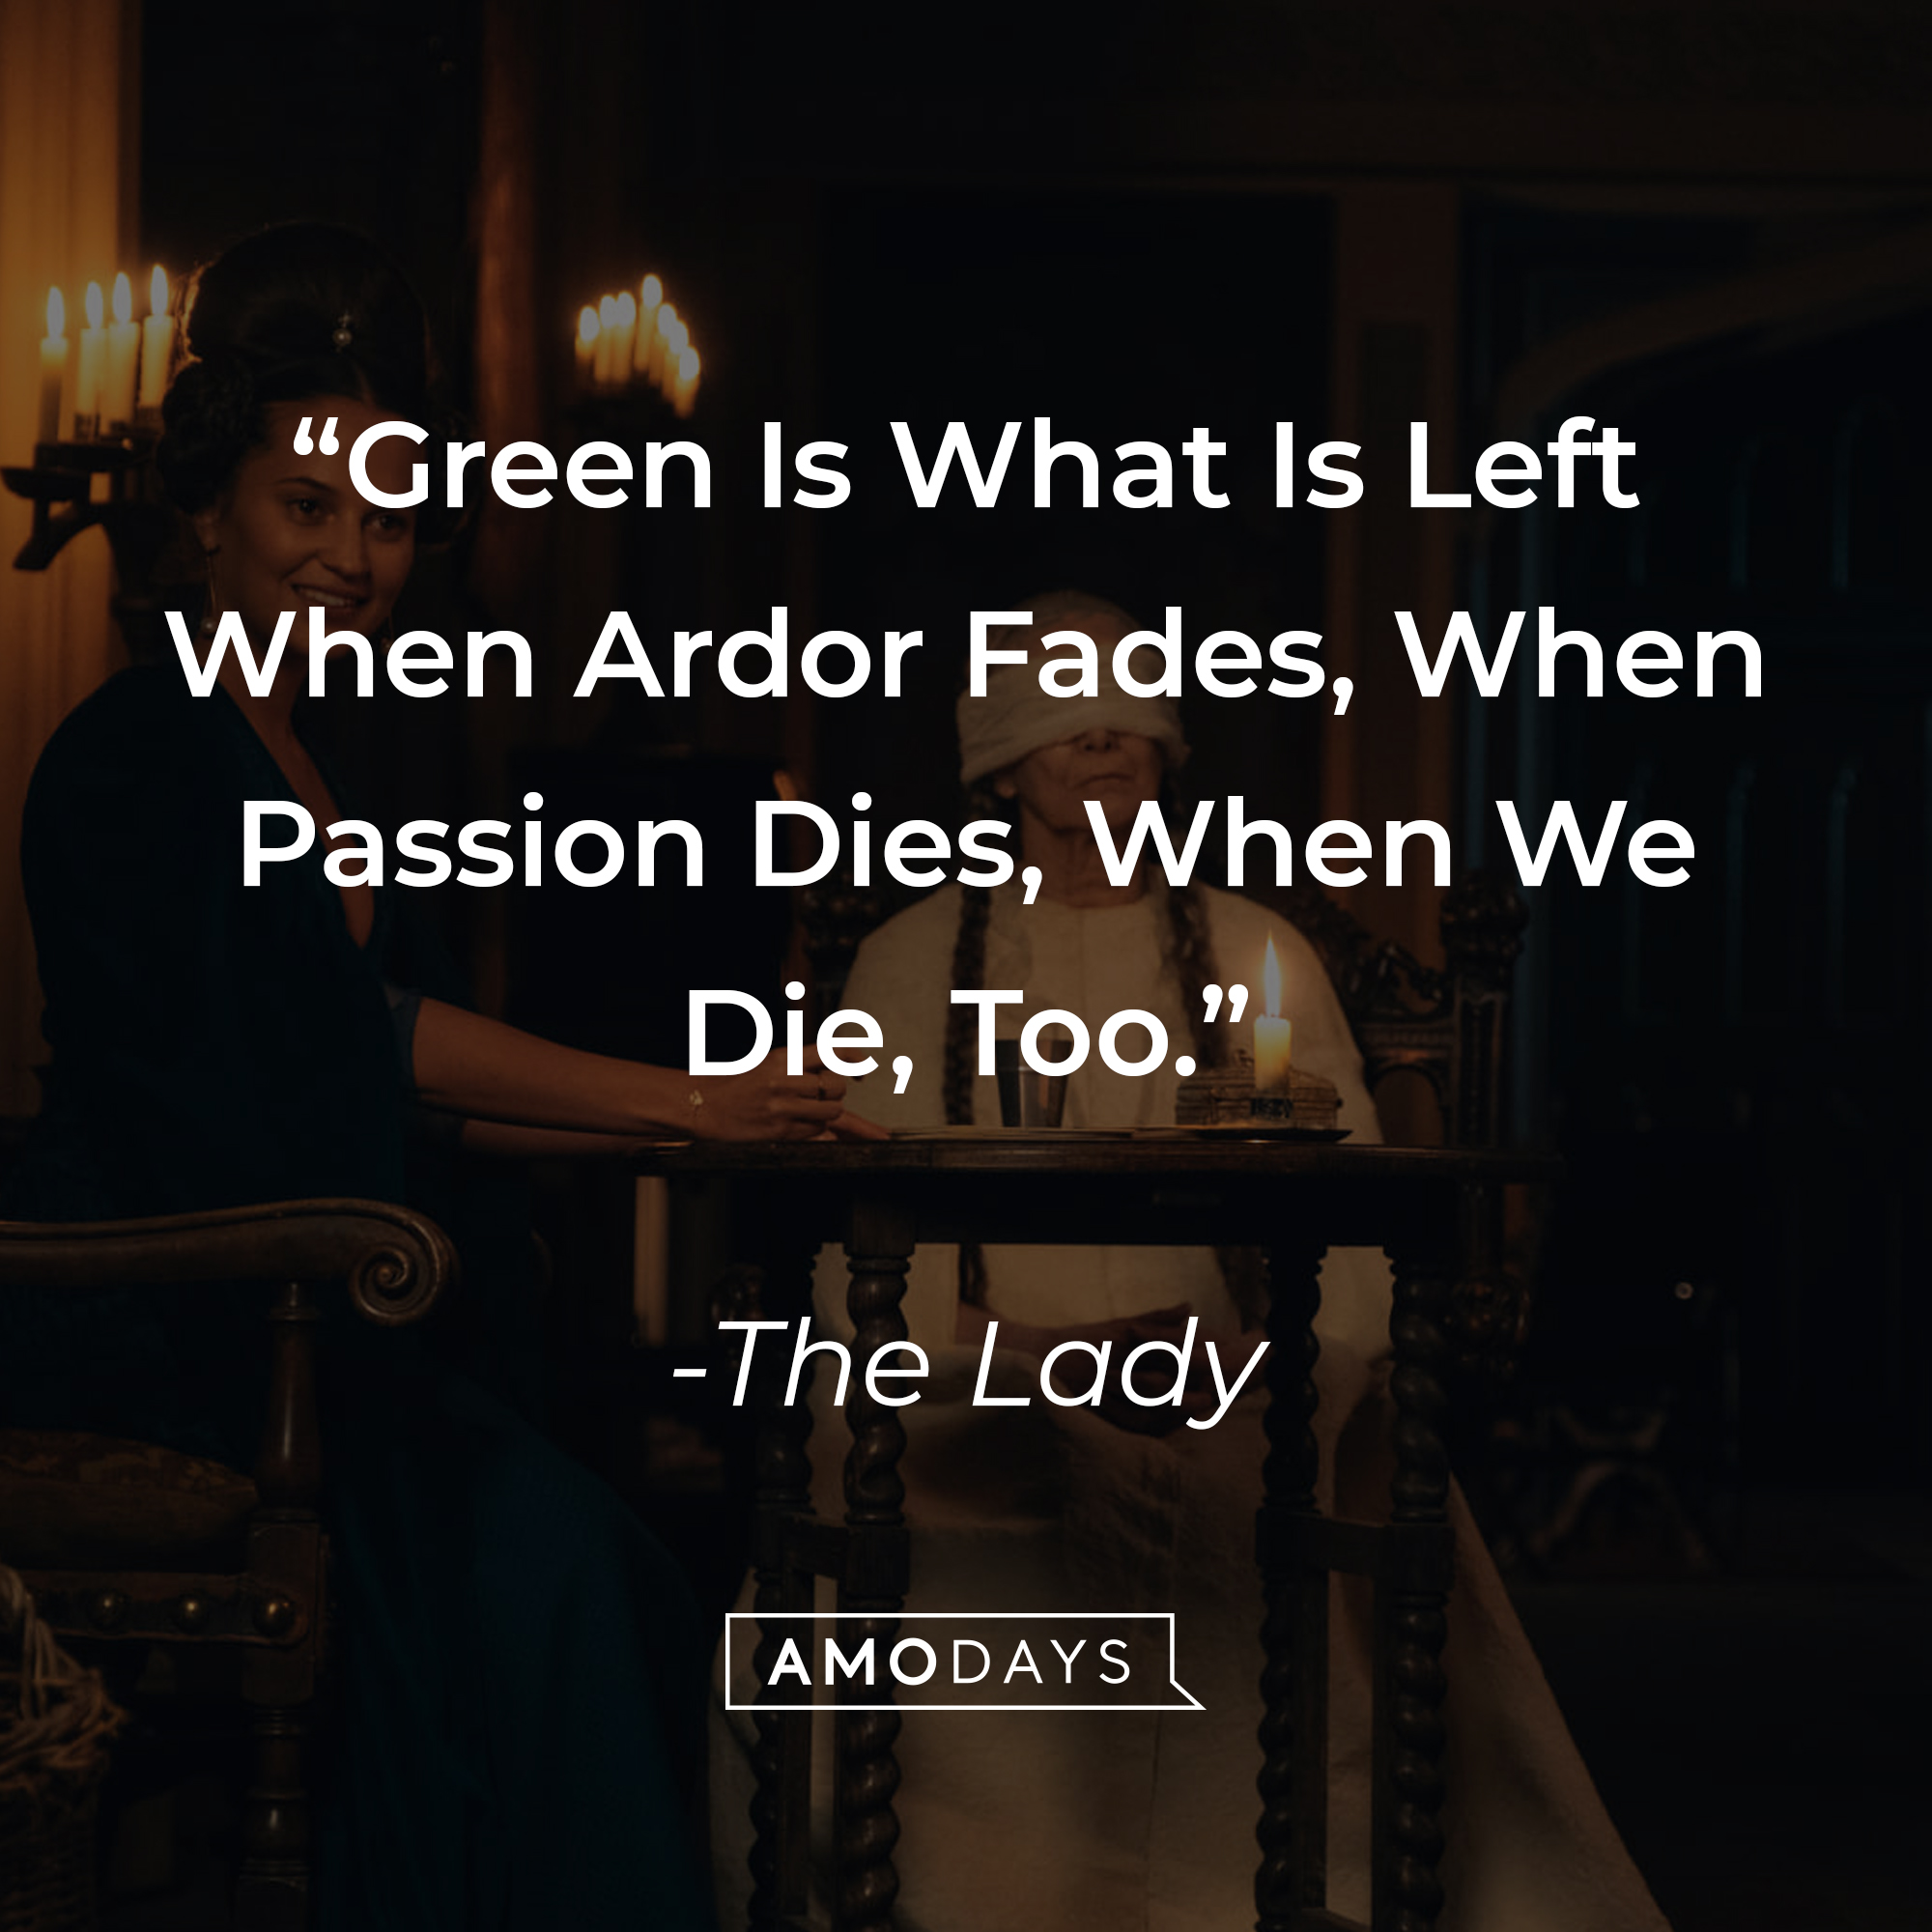 The Lady's quote: "Green Is What Is Left When Ardor Fades, When Passion Dies, When We Die, Too." | Source: facebook.com/TheGreenKnight